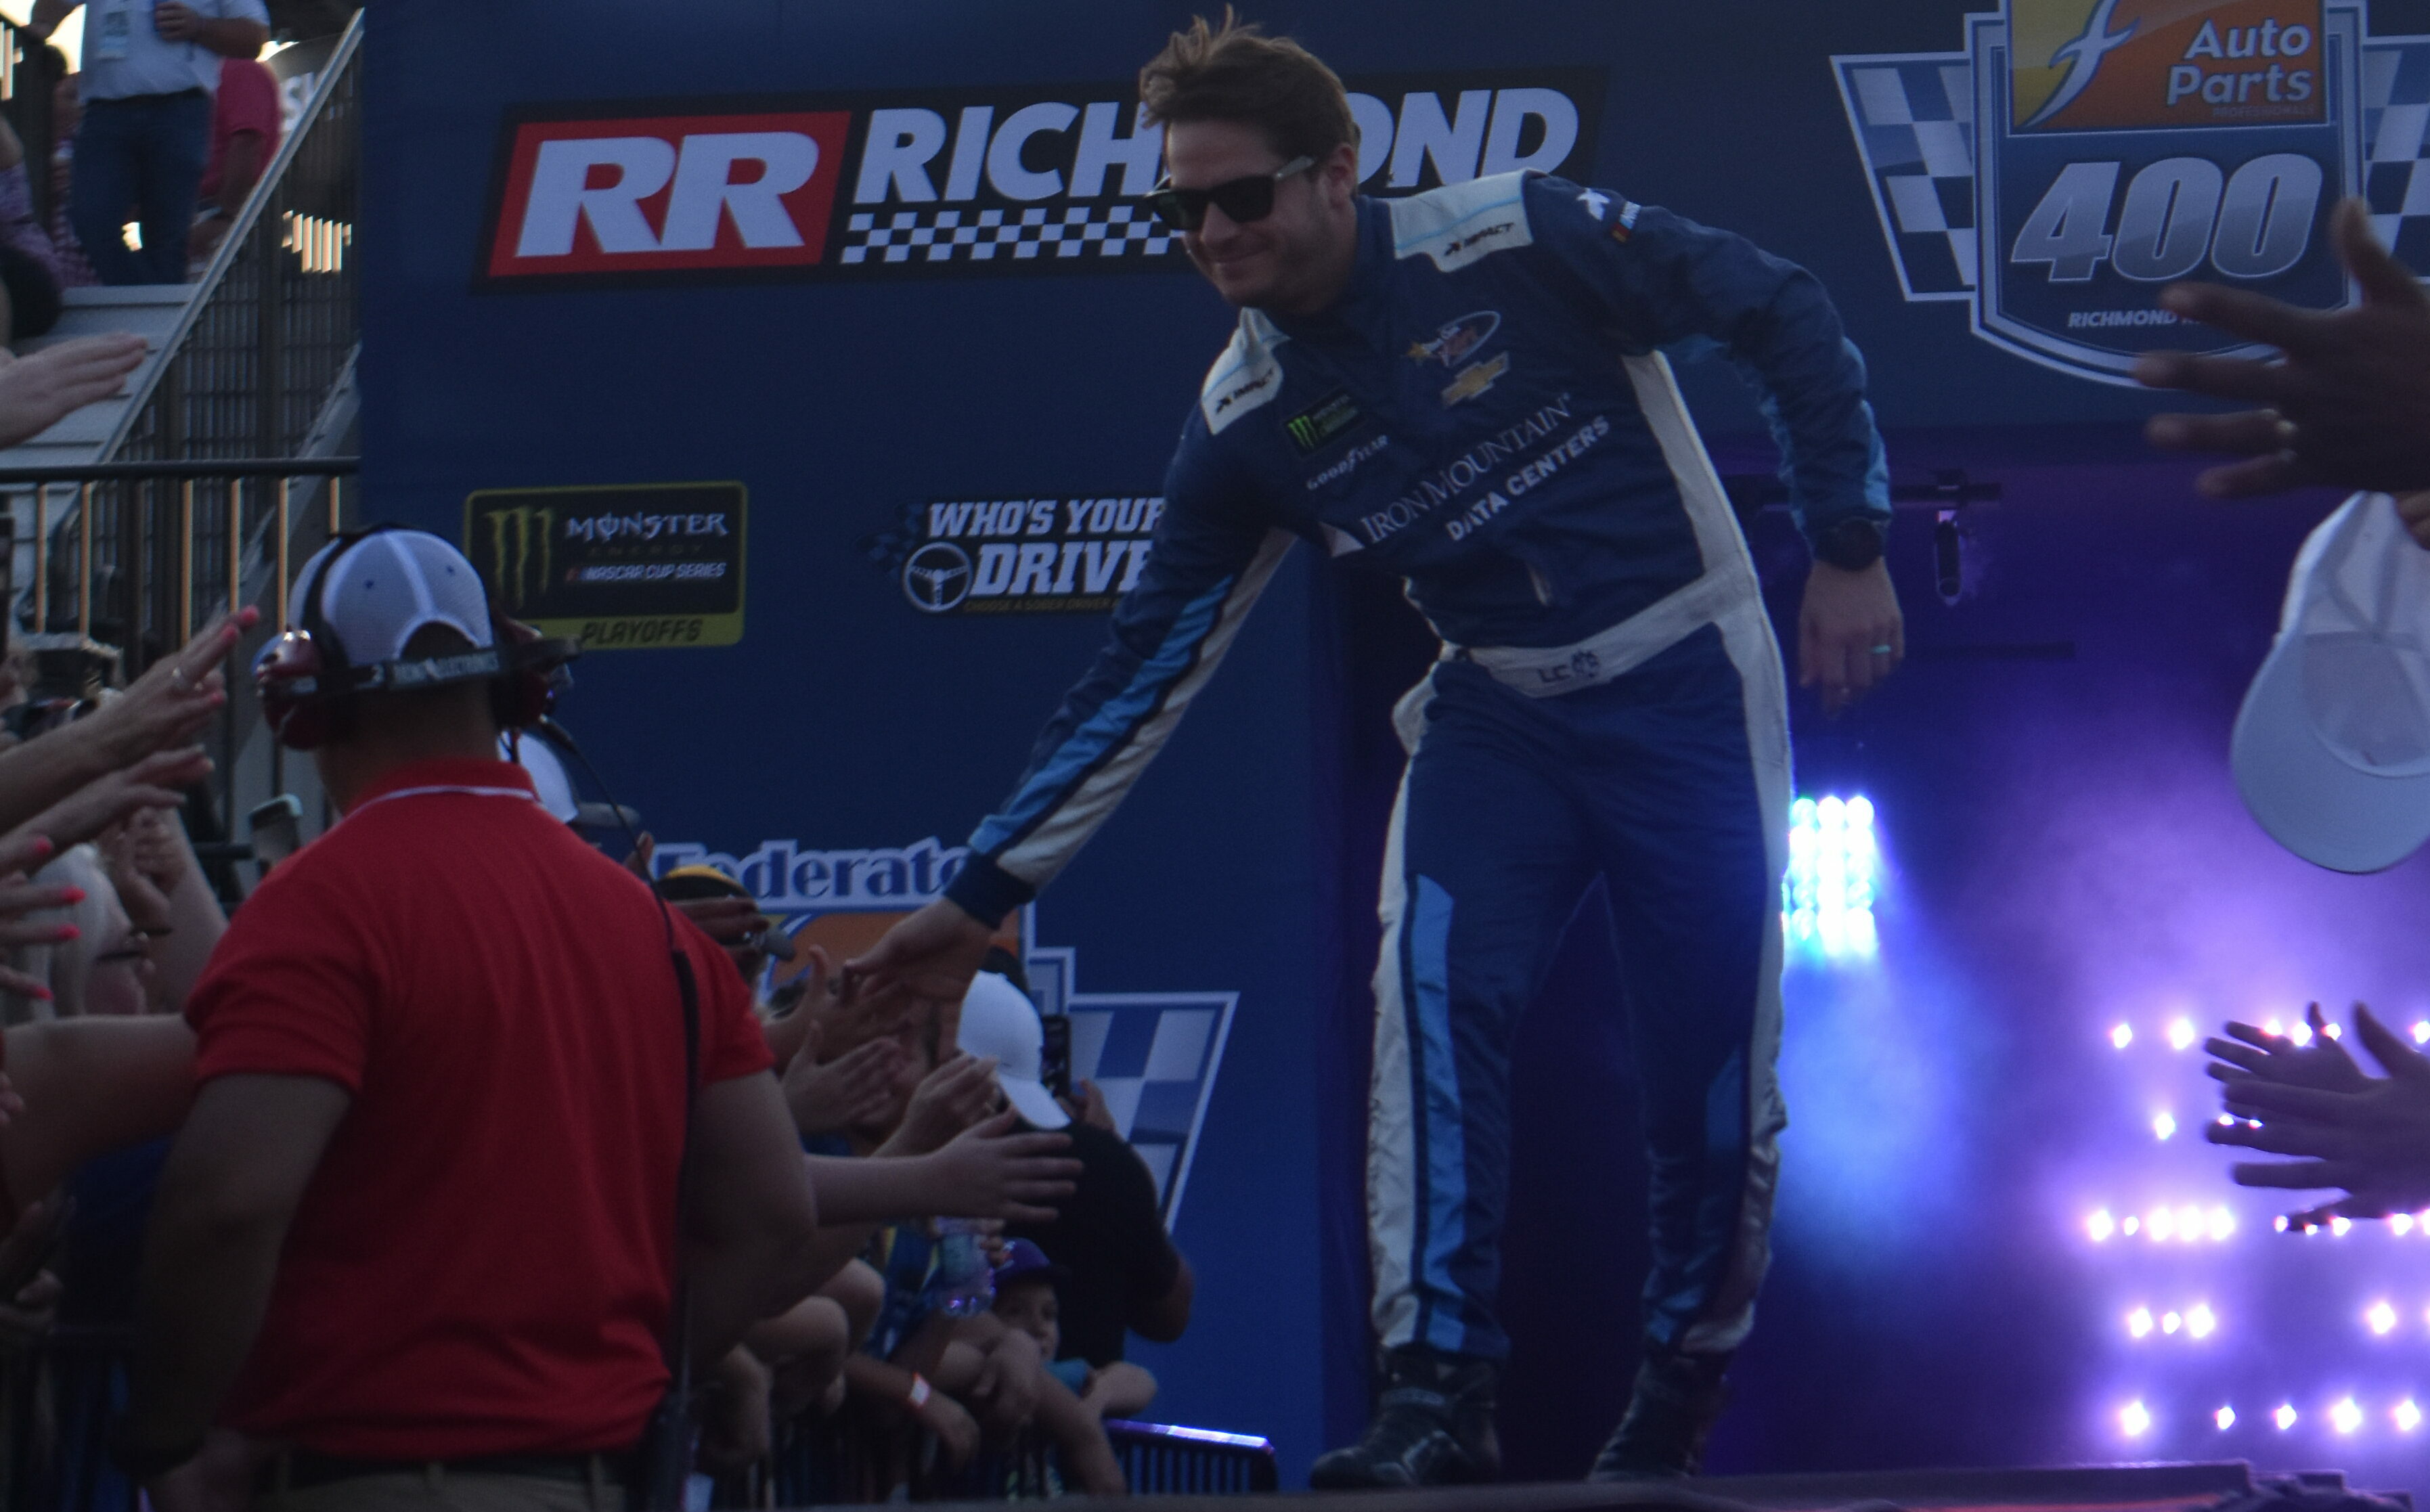 Of course, Cassill enjoys meeting with fans! (Photo Credit: Andrew Fuller/TPF)